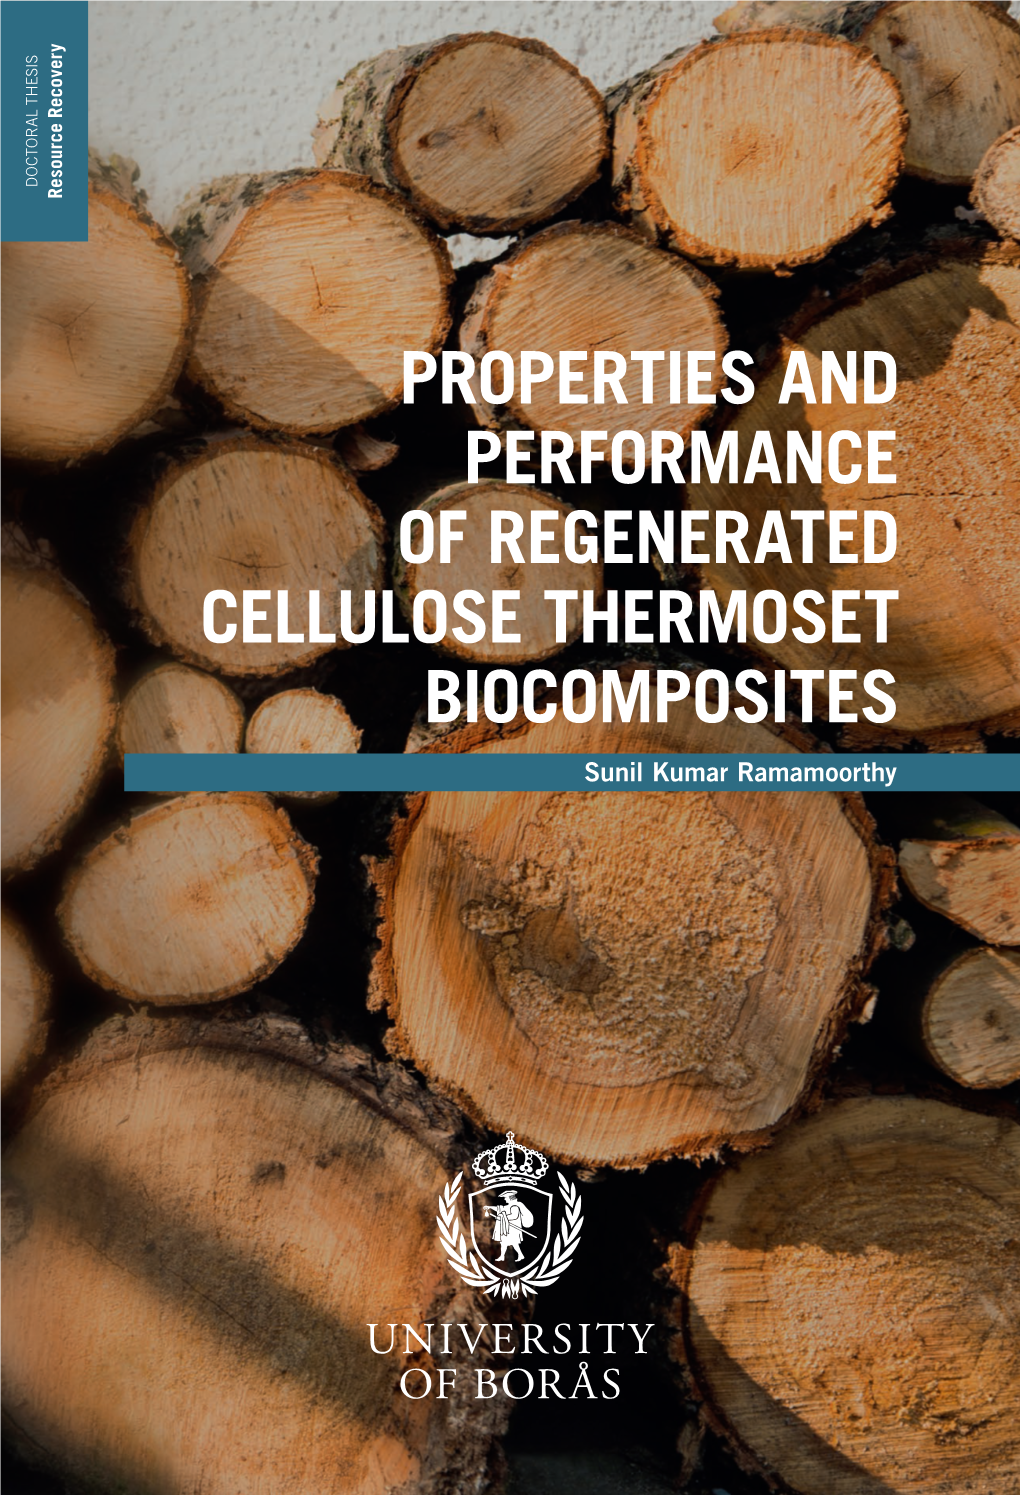 PROPERTIES and PERFORMANCE of REGENERATED CELLULOSE THERMOSET BIOCOMPOSITES THERMOSET CELLULOSE Sunil of REGENERATED Kumar PERFORMANCE and Ramamoorthy PROPERTIES